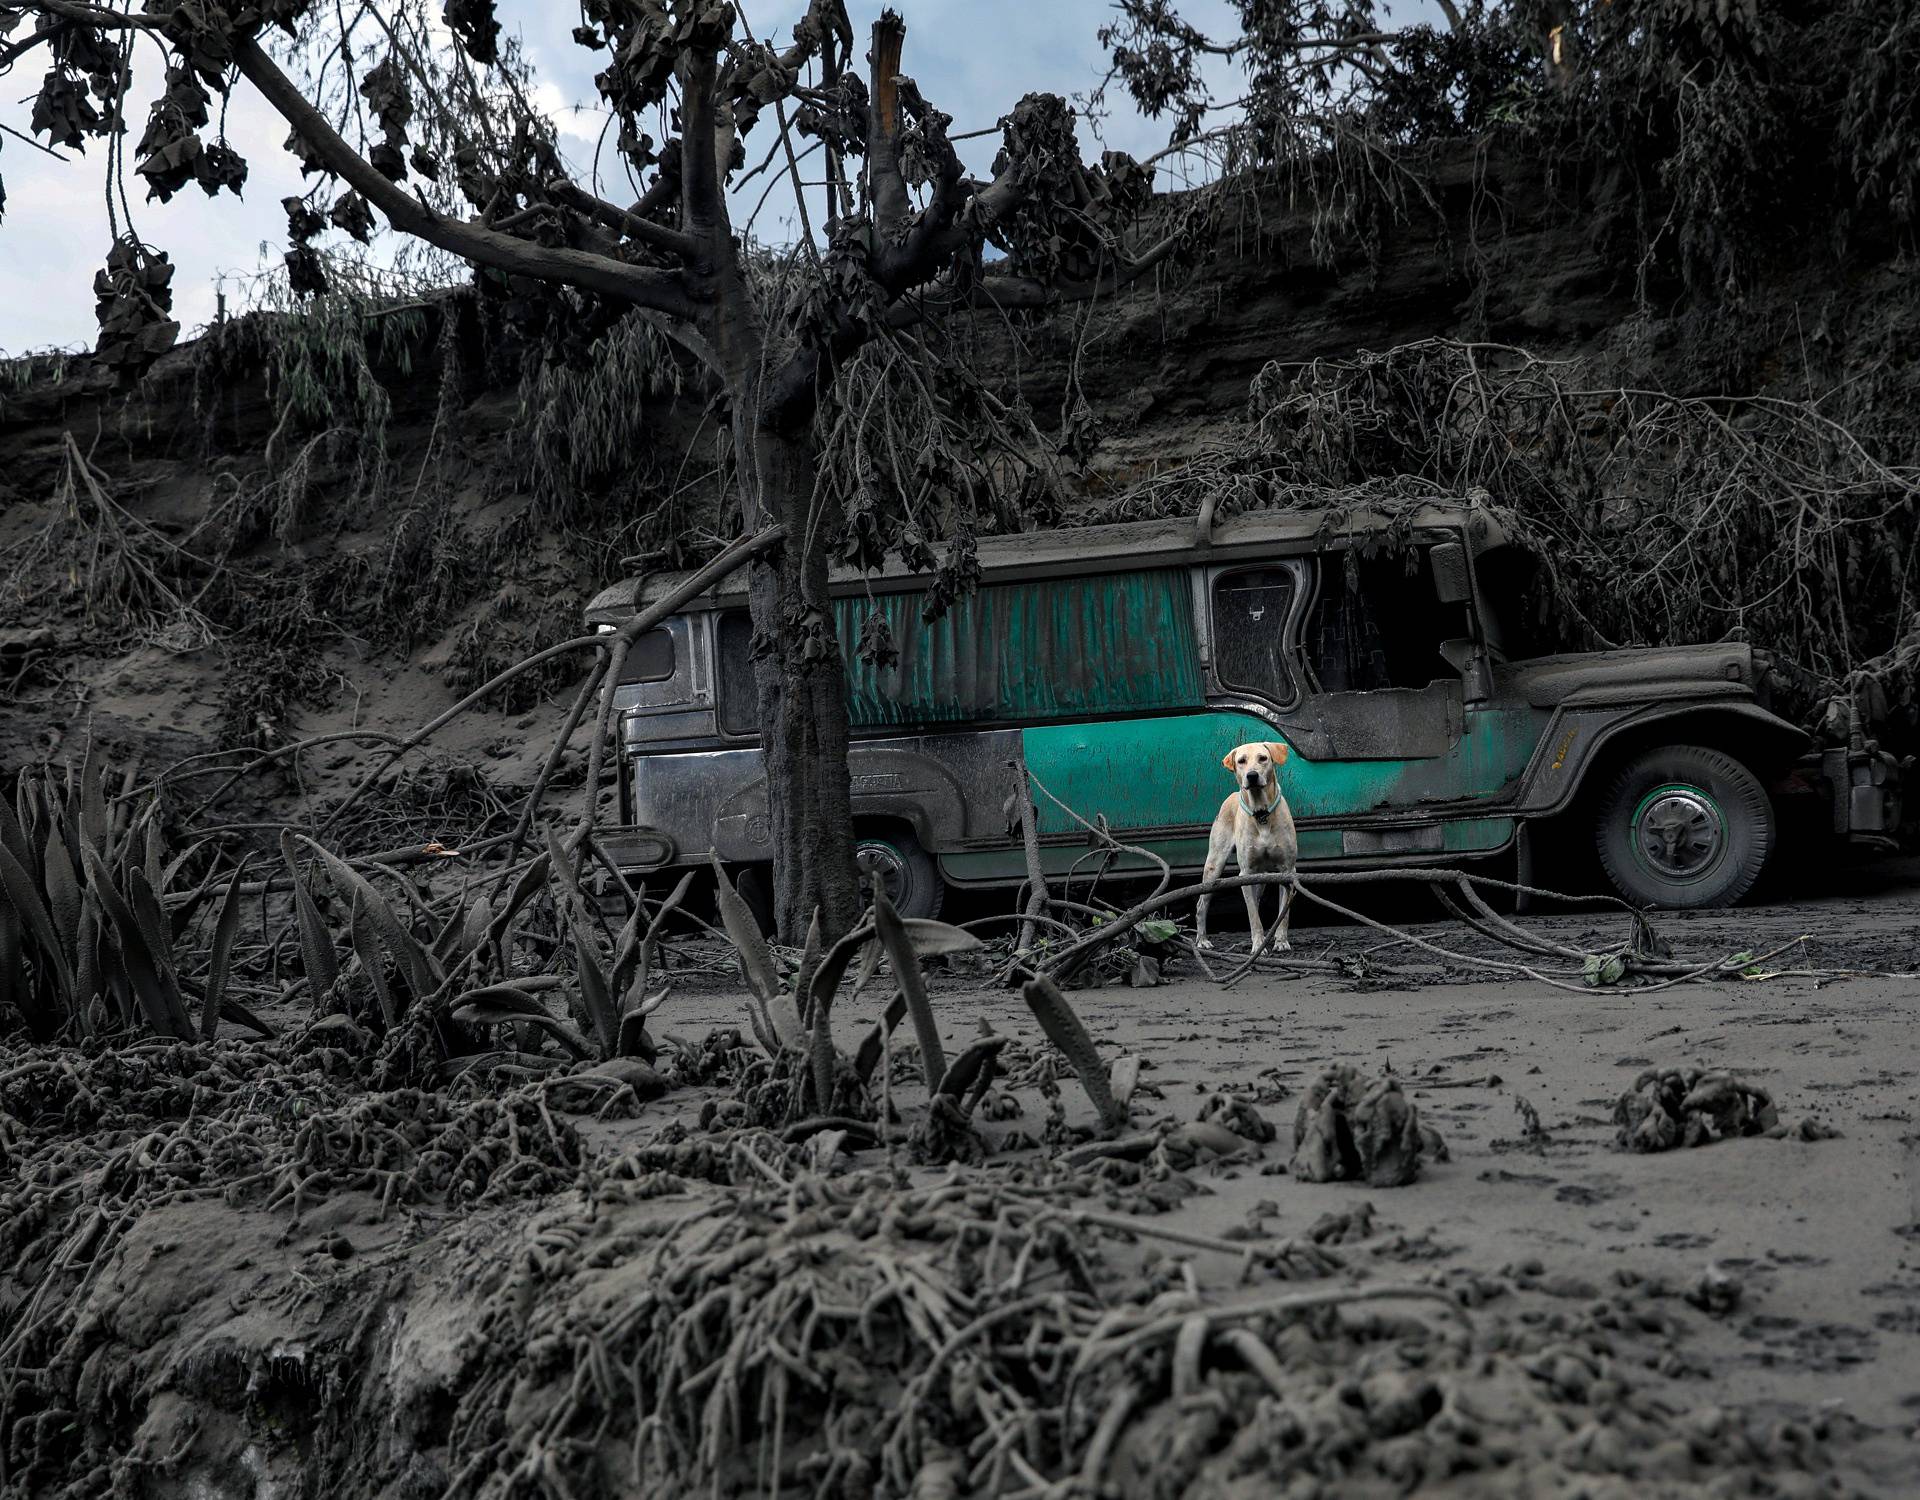 A dog left in a garage covered with ashes barks nearby the erupting Taal Volcano in Talisay